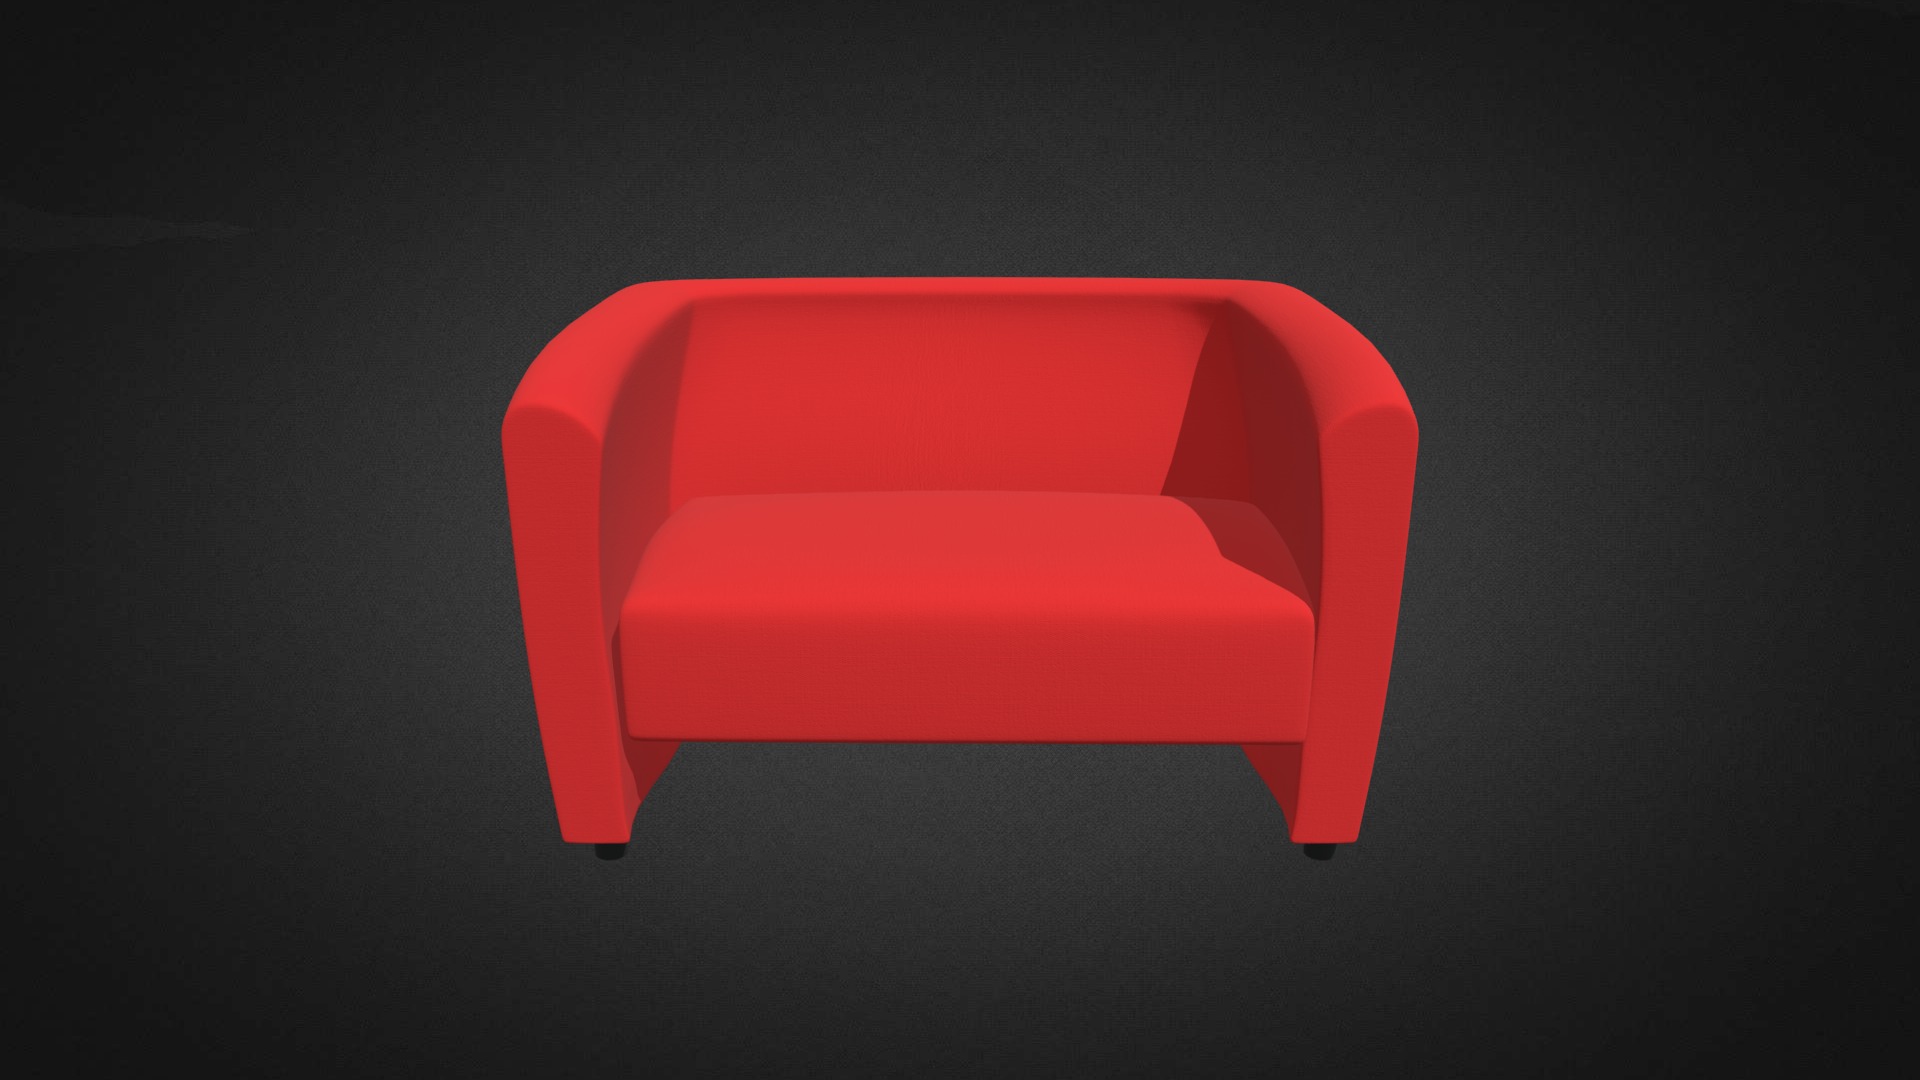 3D model Fabric Jo Jo Sofa Hire - This is a 3D model of the Fabric Jo Jo Sofa Hire. The 3D model is about a red square with a black background.